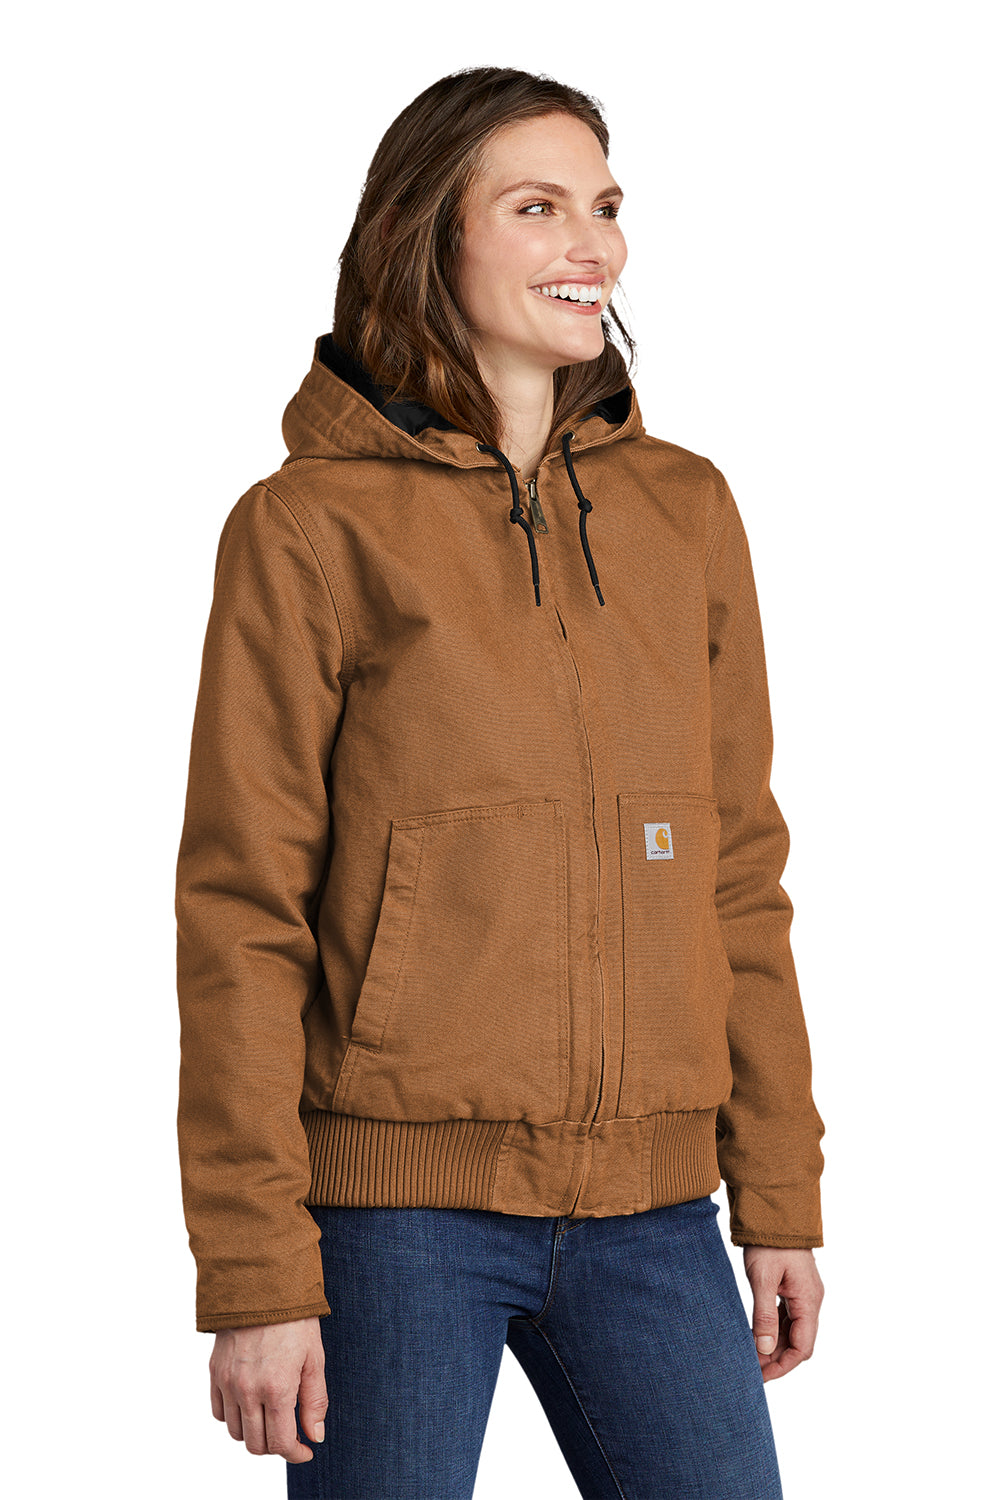 Carhartt CT104053 Womens Active Washed Duck Full Zip Hooded Jacket Carhartt Brown Model 3Q